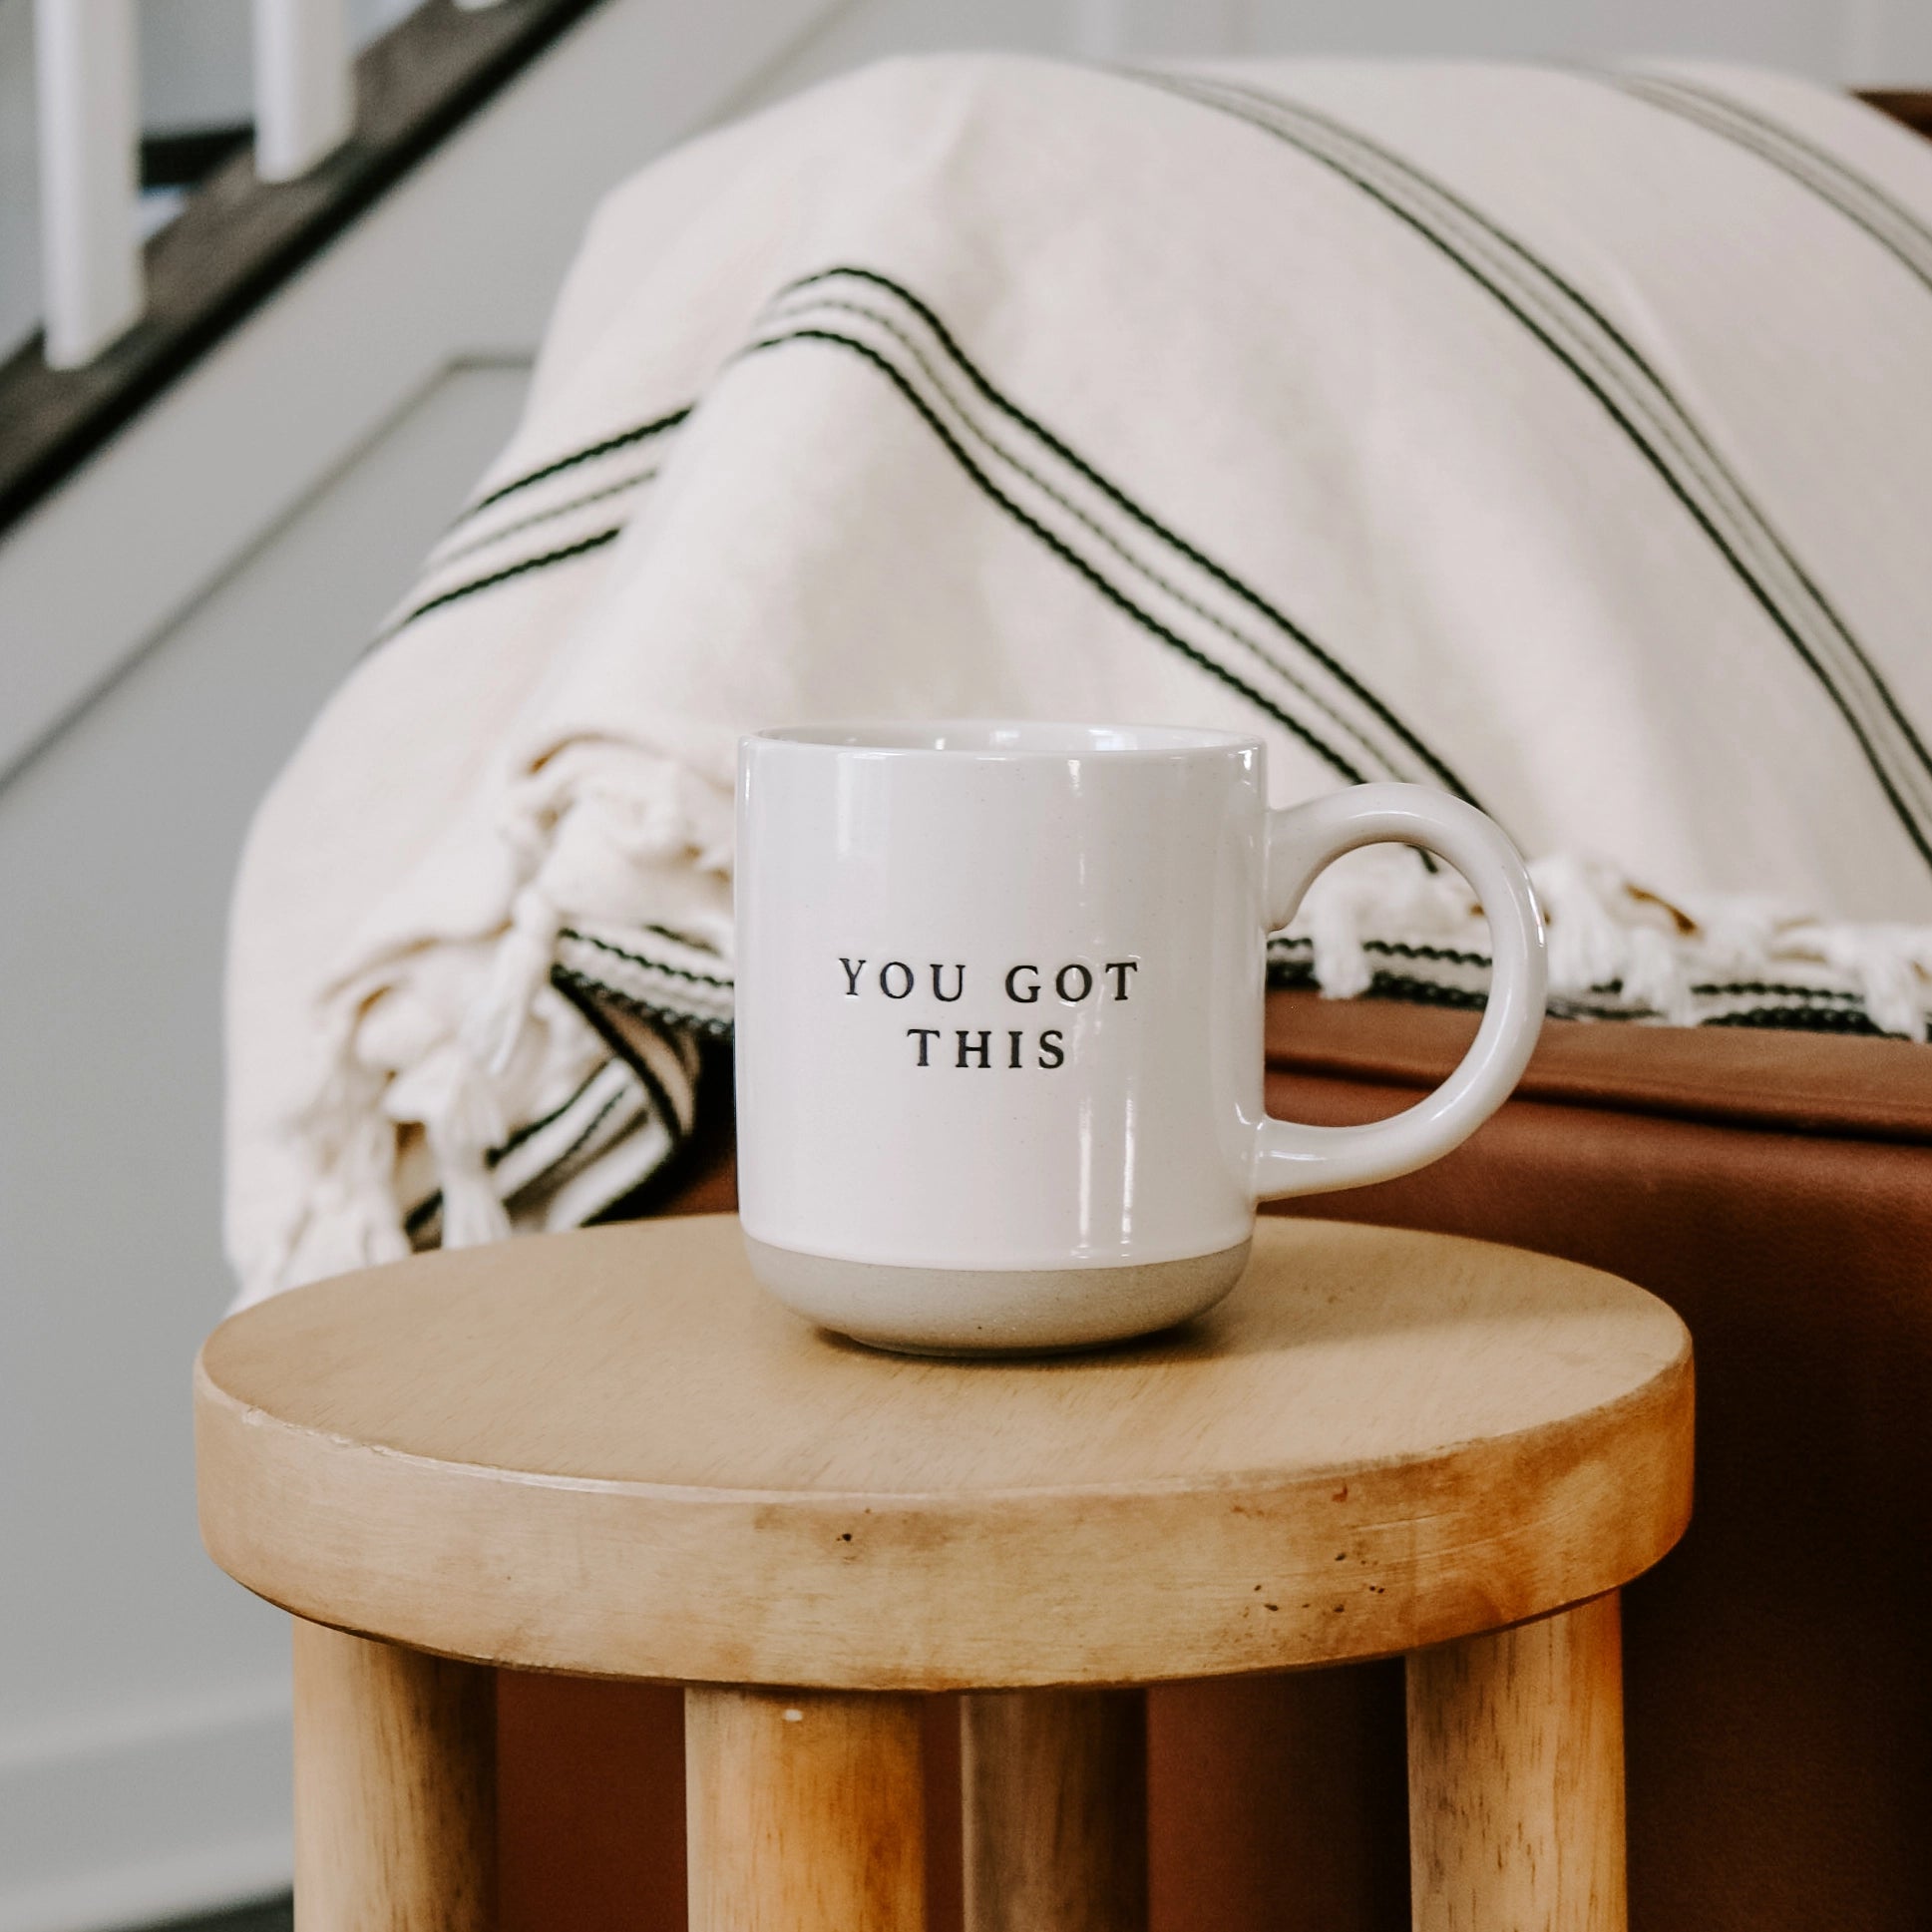 Cream and brown stoneware mug with black 'you got this' text embossed, on a wooden side table in front of sofa.